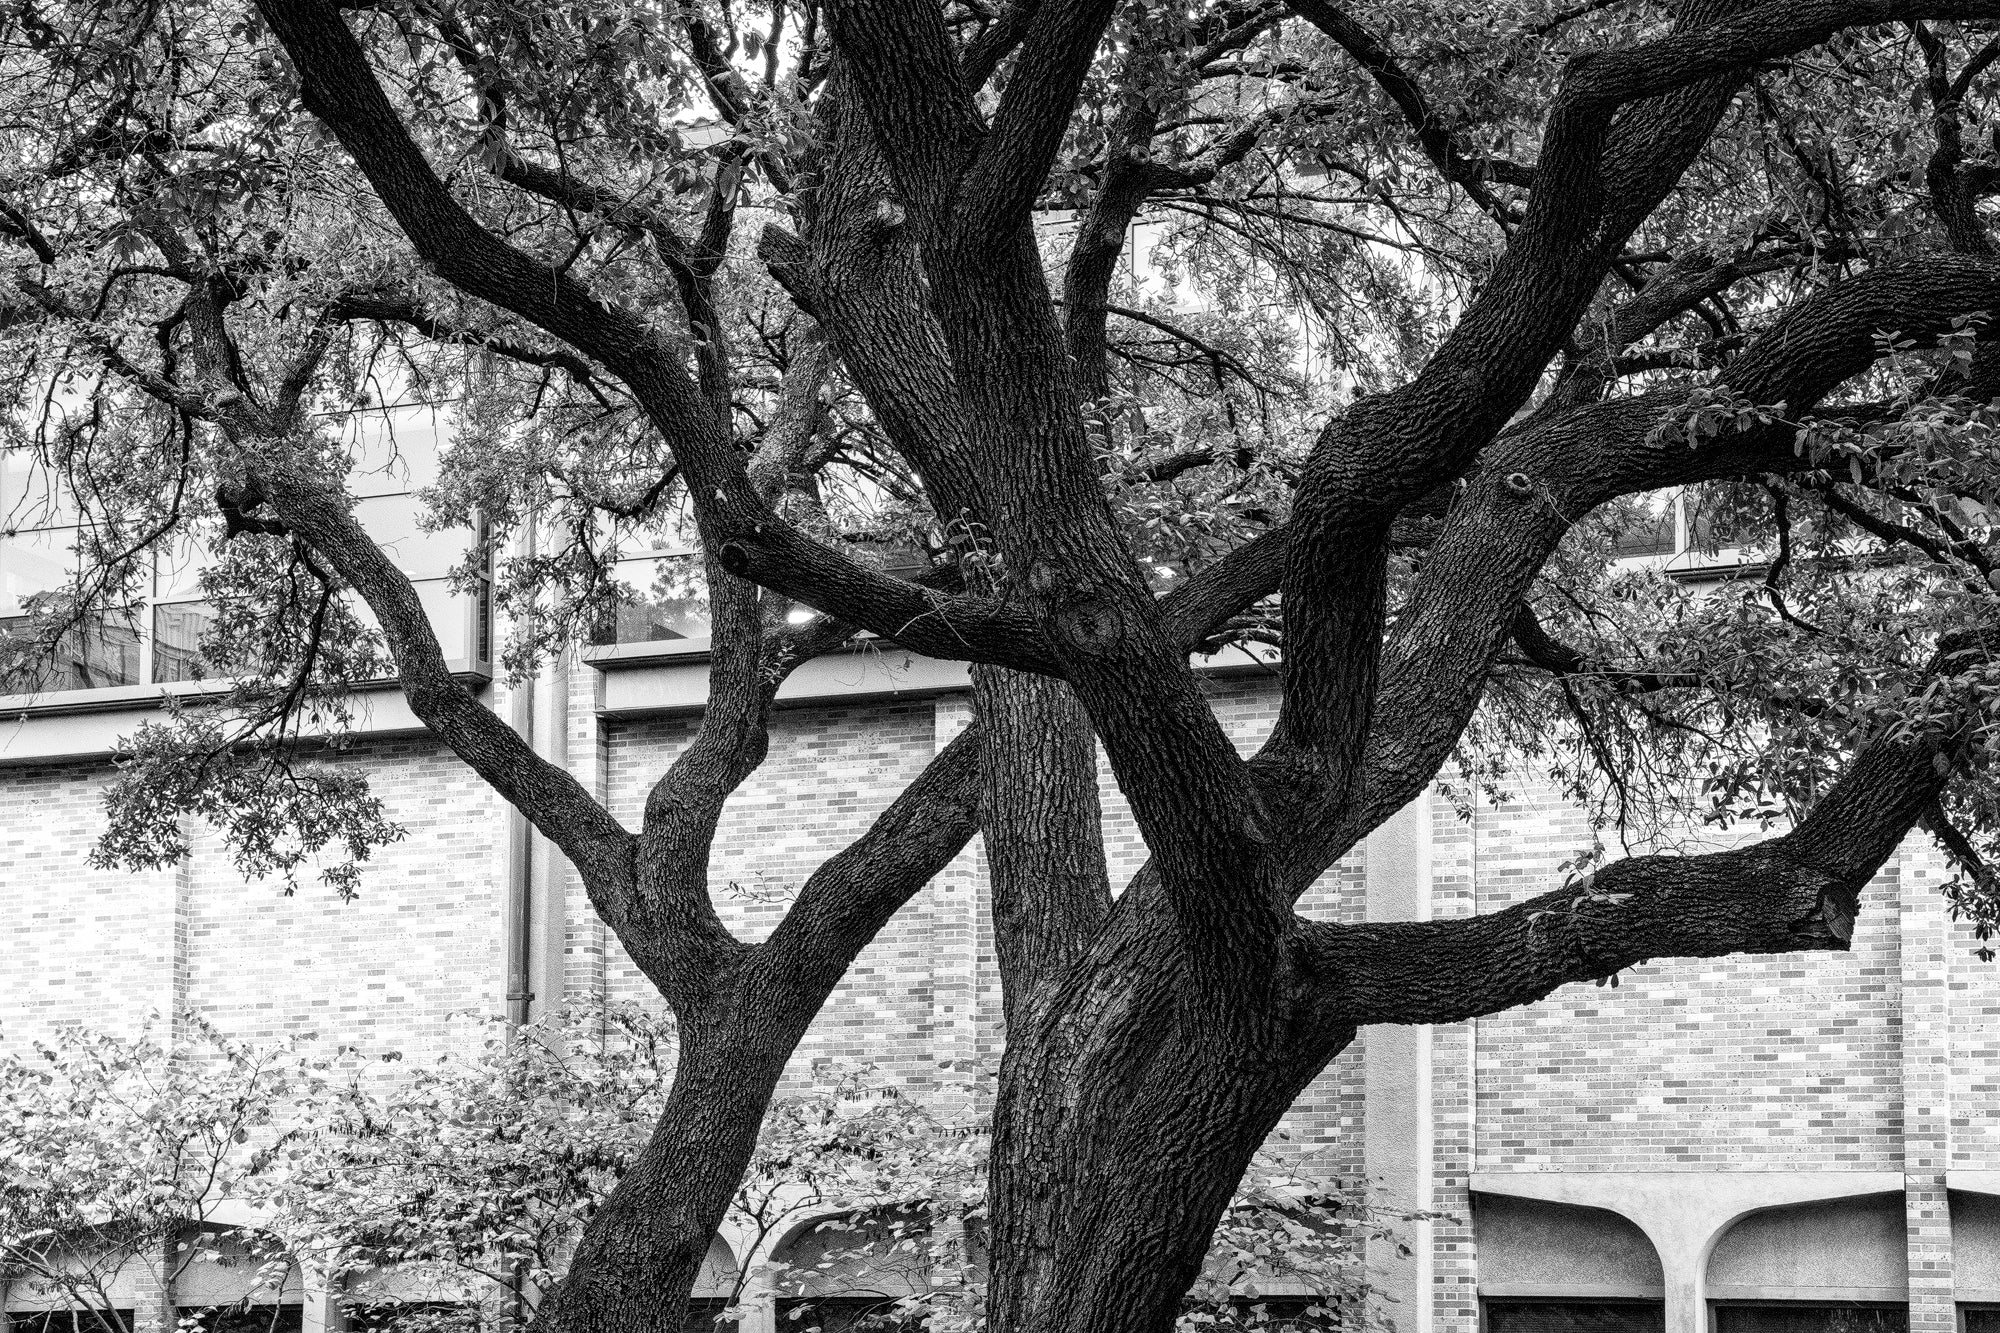 Three Trees on the Campus of UT Austin - Black and White Photograph by Keith Dotson. Buy a print here.